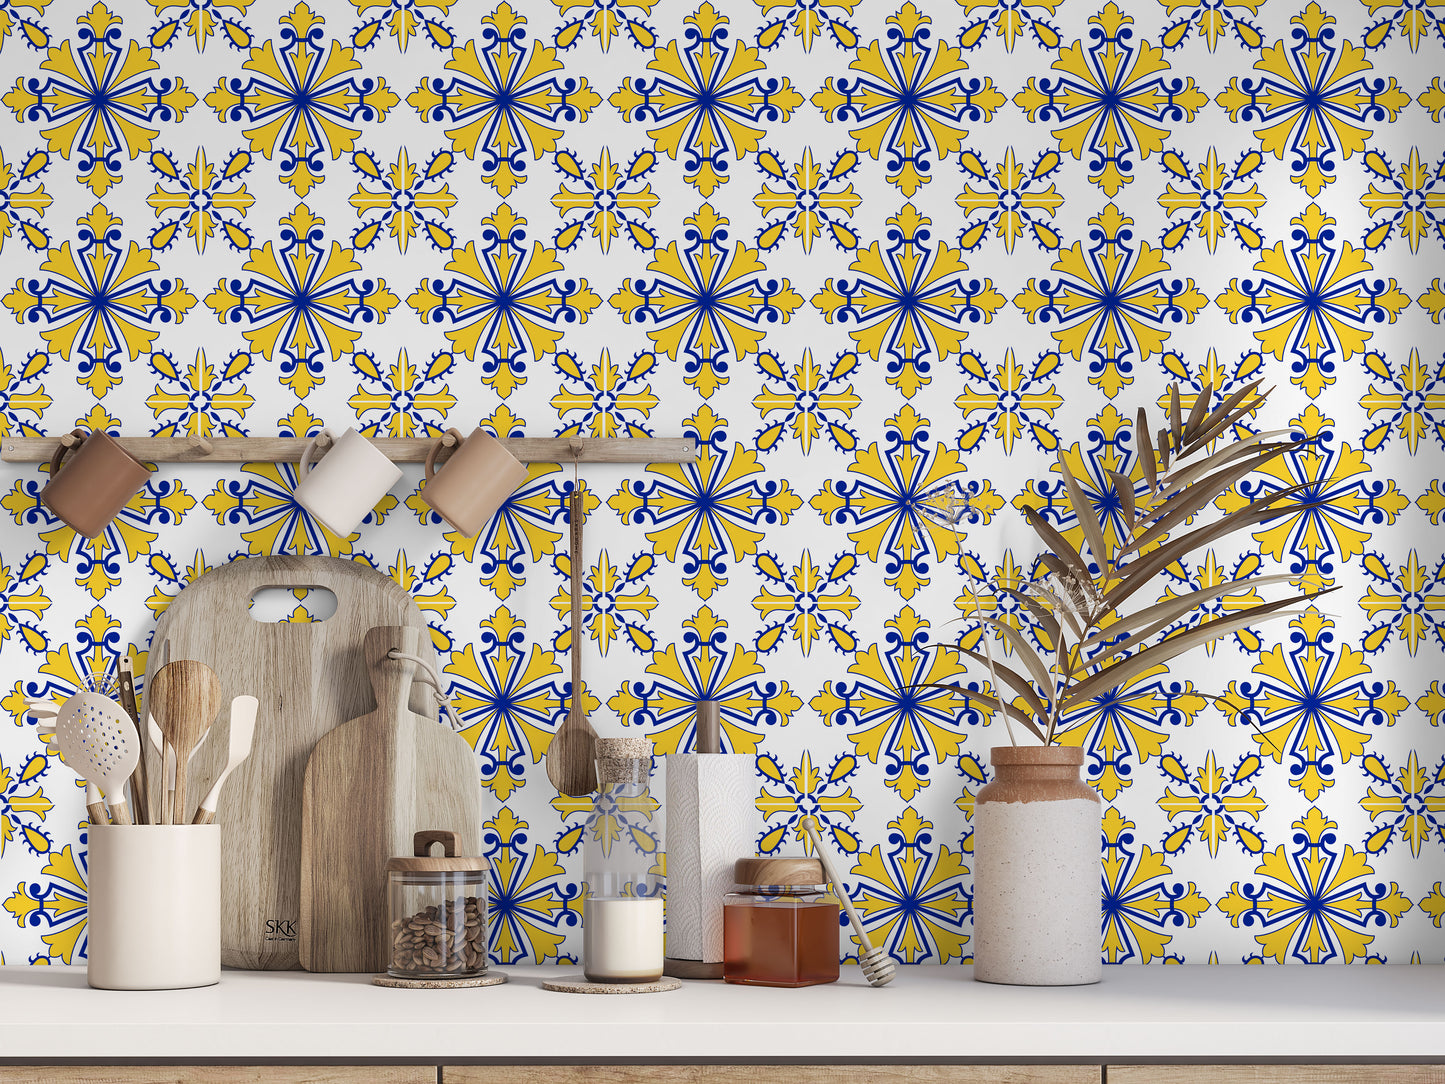 Bright Yellow & Blue Fluted Art Deco Removable Tile Stickers